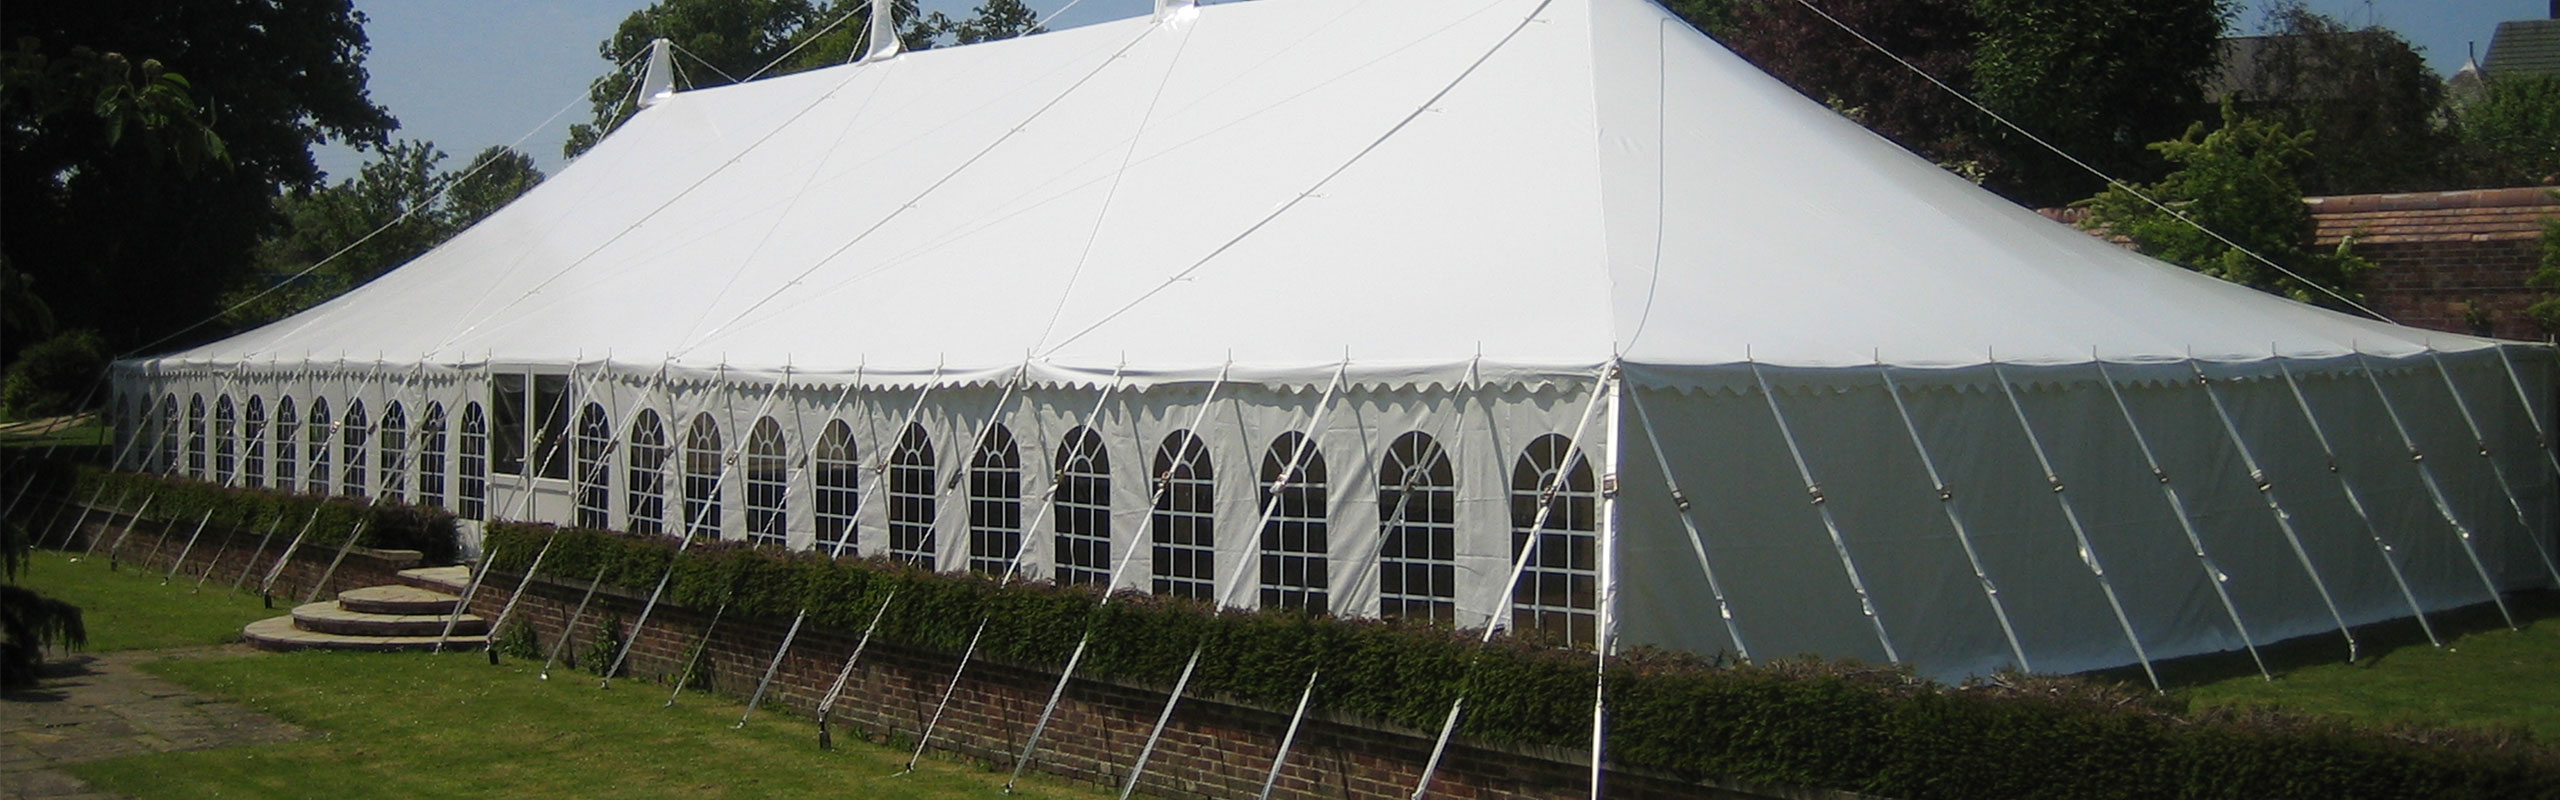 Marquees Hire Suffolk Prices